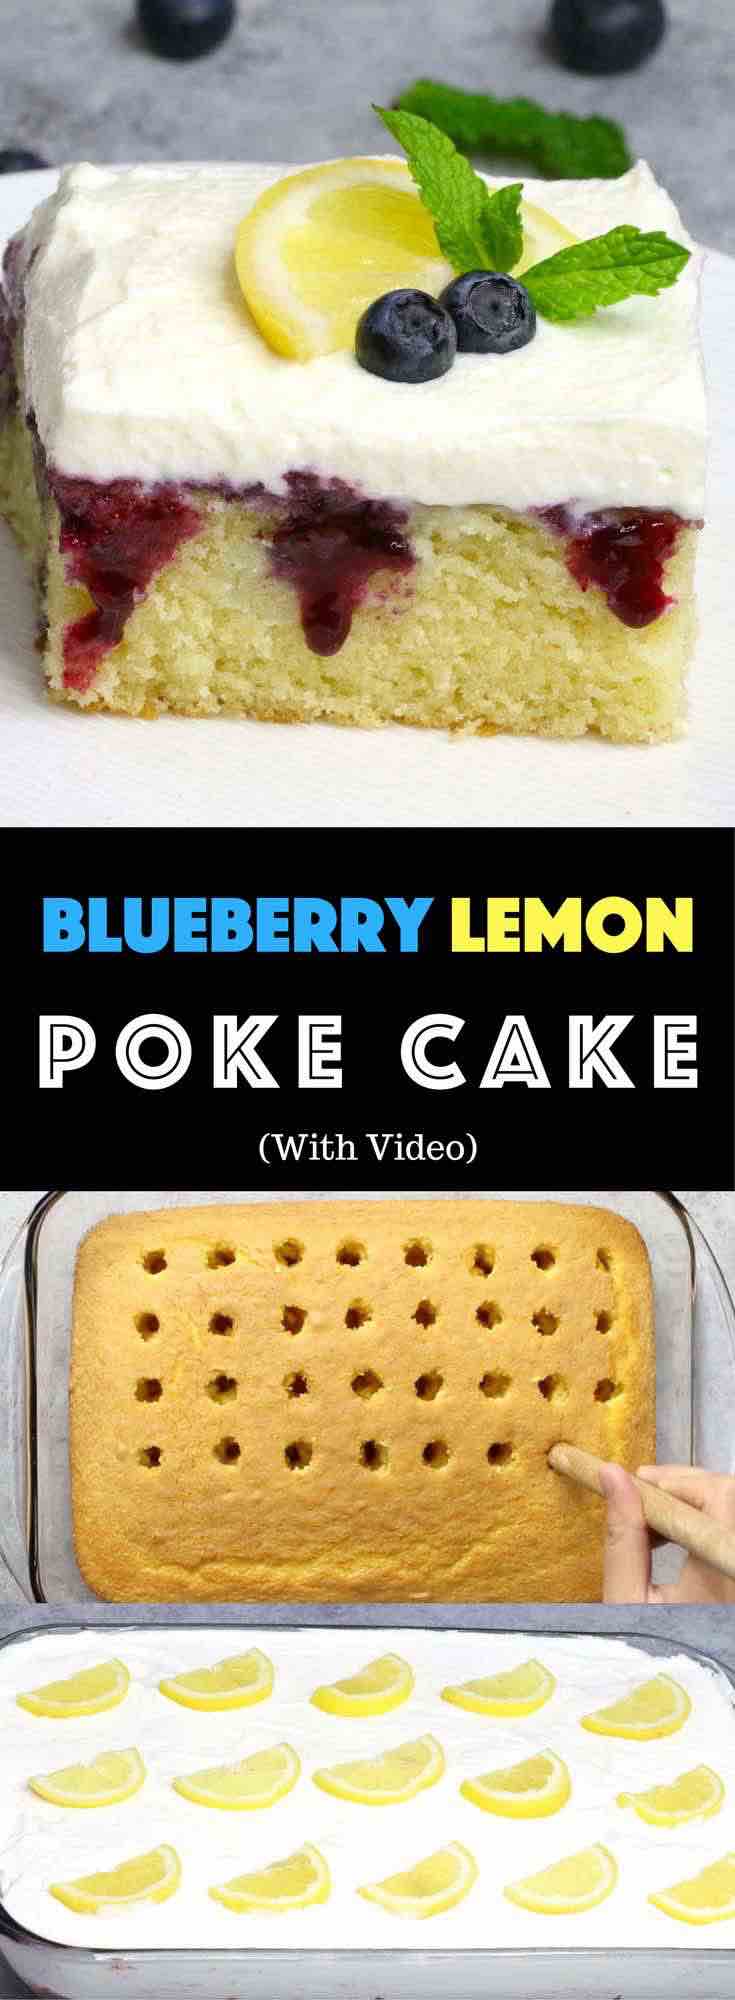 This Lemon Blueberry Poke Cake is bursting with the taste of fresh citrus and berries on a moist yellow cake! It's the perfect make-ahead dessert for summer parties and potlucks! #pokecake